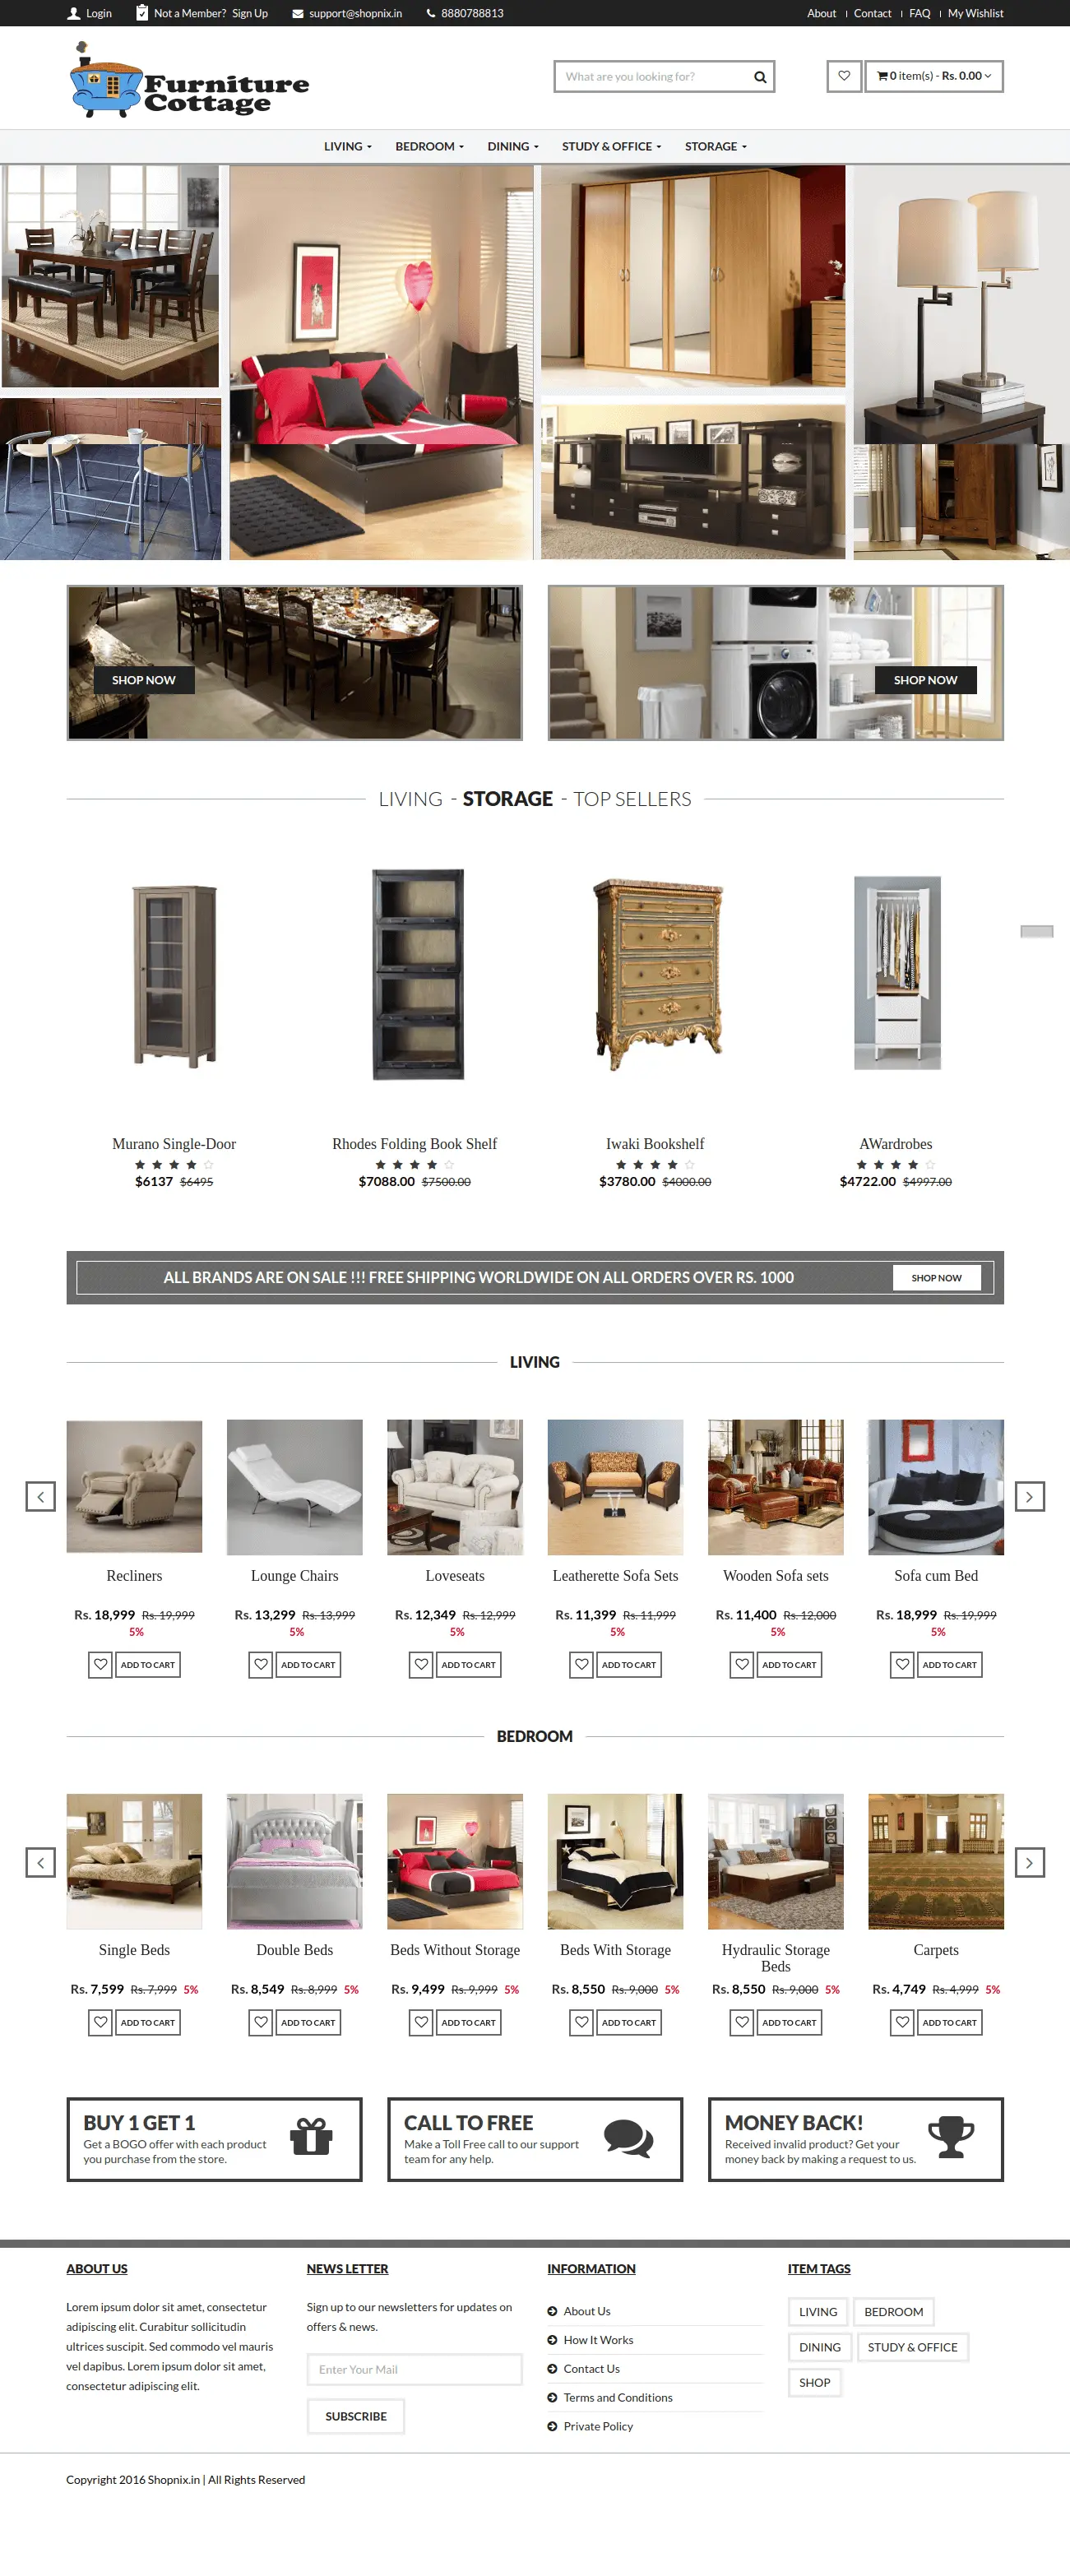 Free eCommerce themes for your online store builder - Shopnix